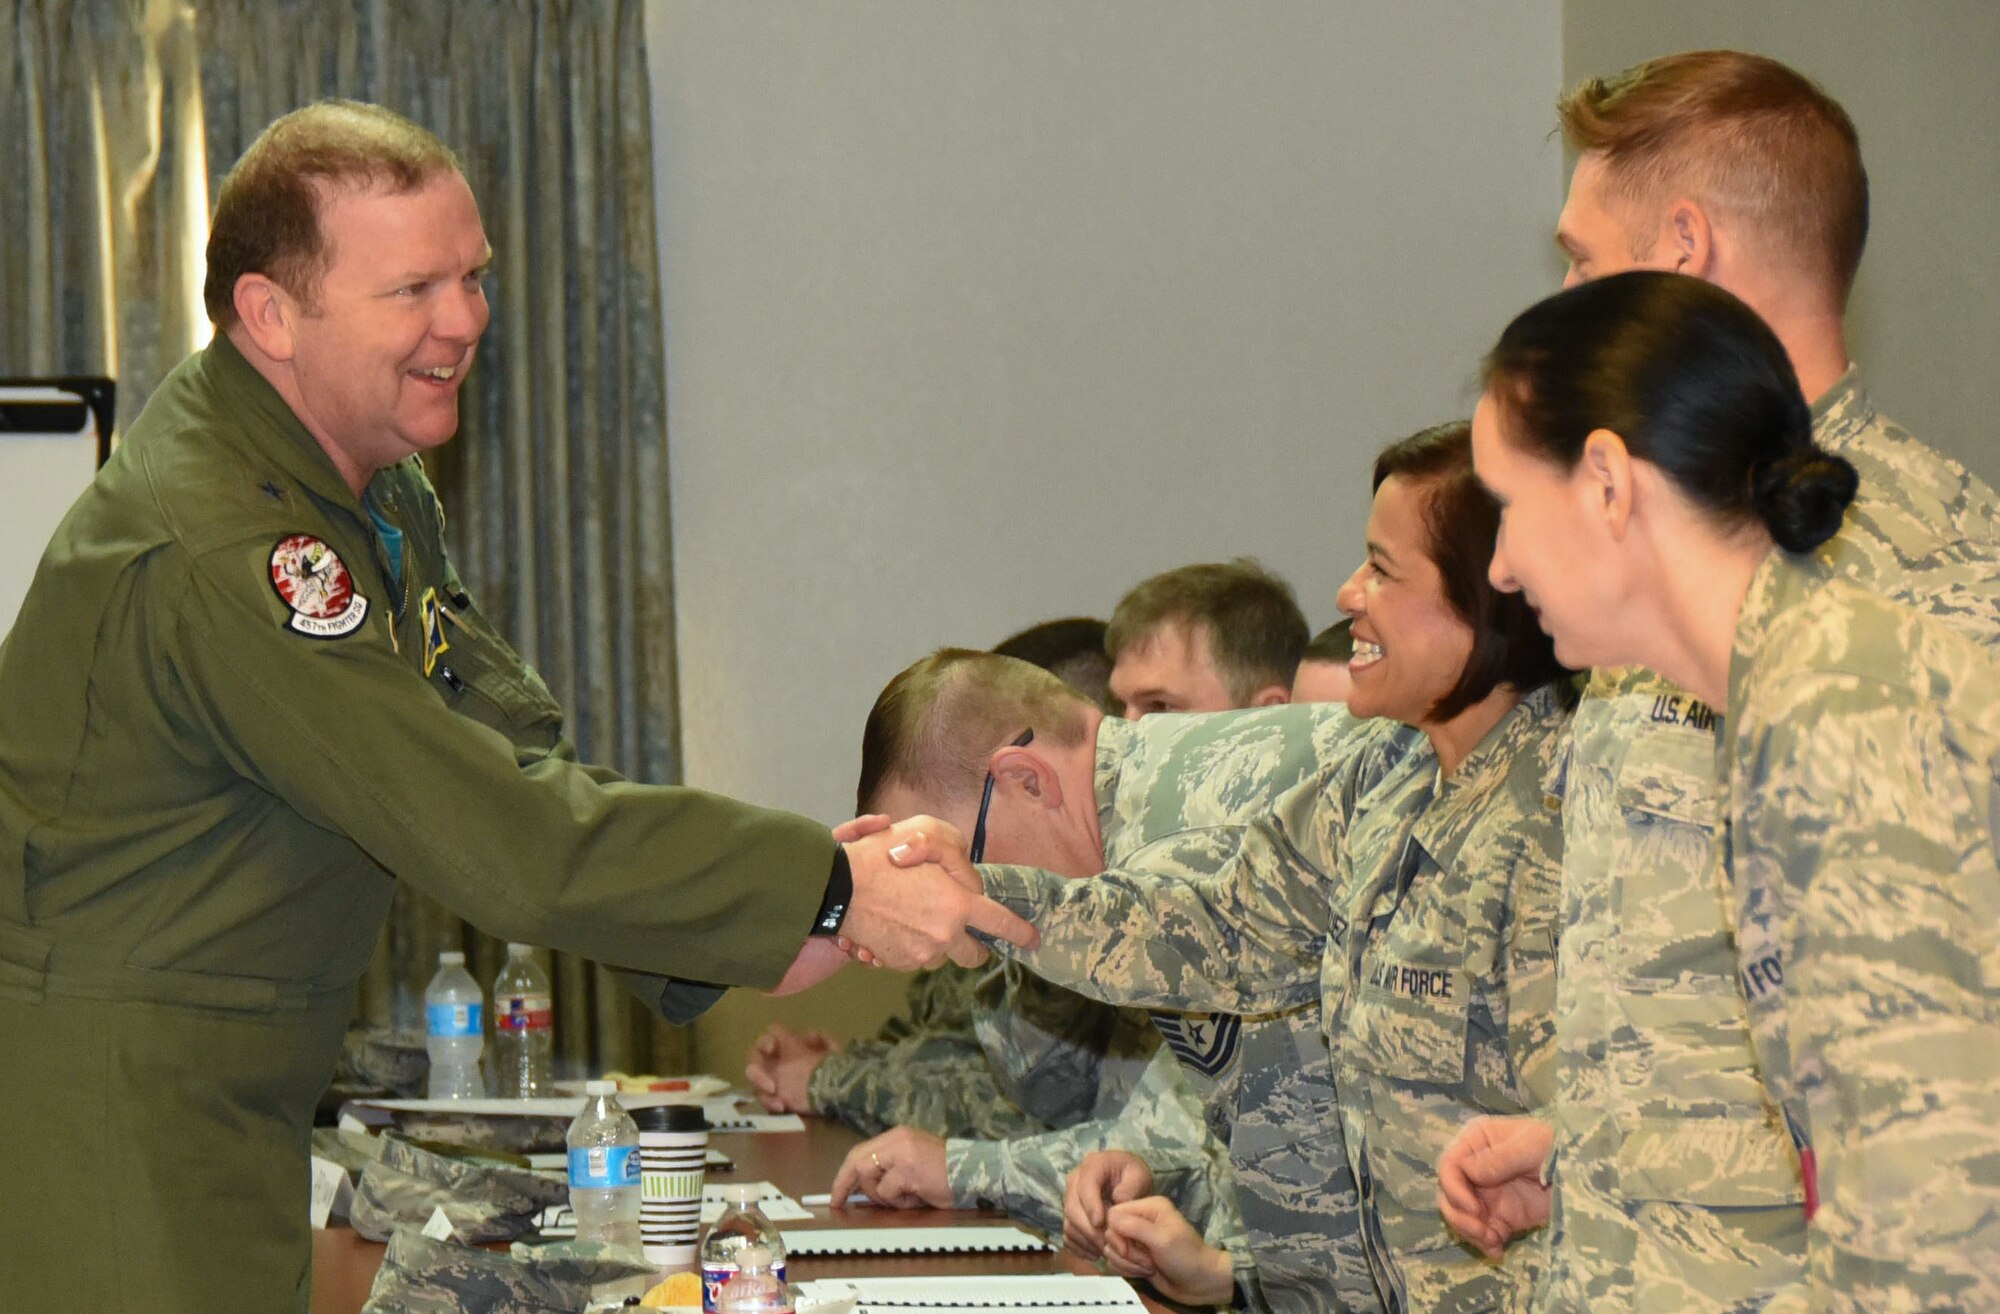 Tenth Air Force Commander Maj. Gen. Richard Scobee greets chaplain corps members from the 920th Rescue Wing, Patrick AFB, Fla., at Naval Air Station Fort Worth Joint Reserve Base, Texas, April 25, 2017. 10th AF chaplains and their assistants gathered here for the first training event specifically for them since the re-designation of the numbered Air Force in 1976. (U.S. Air Force photo by Tech. Sgt. Jeremy Roman)